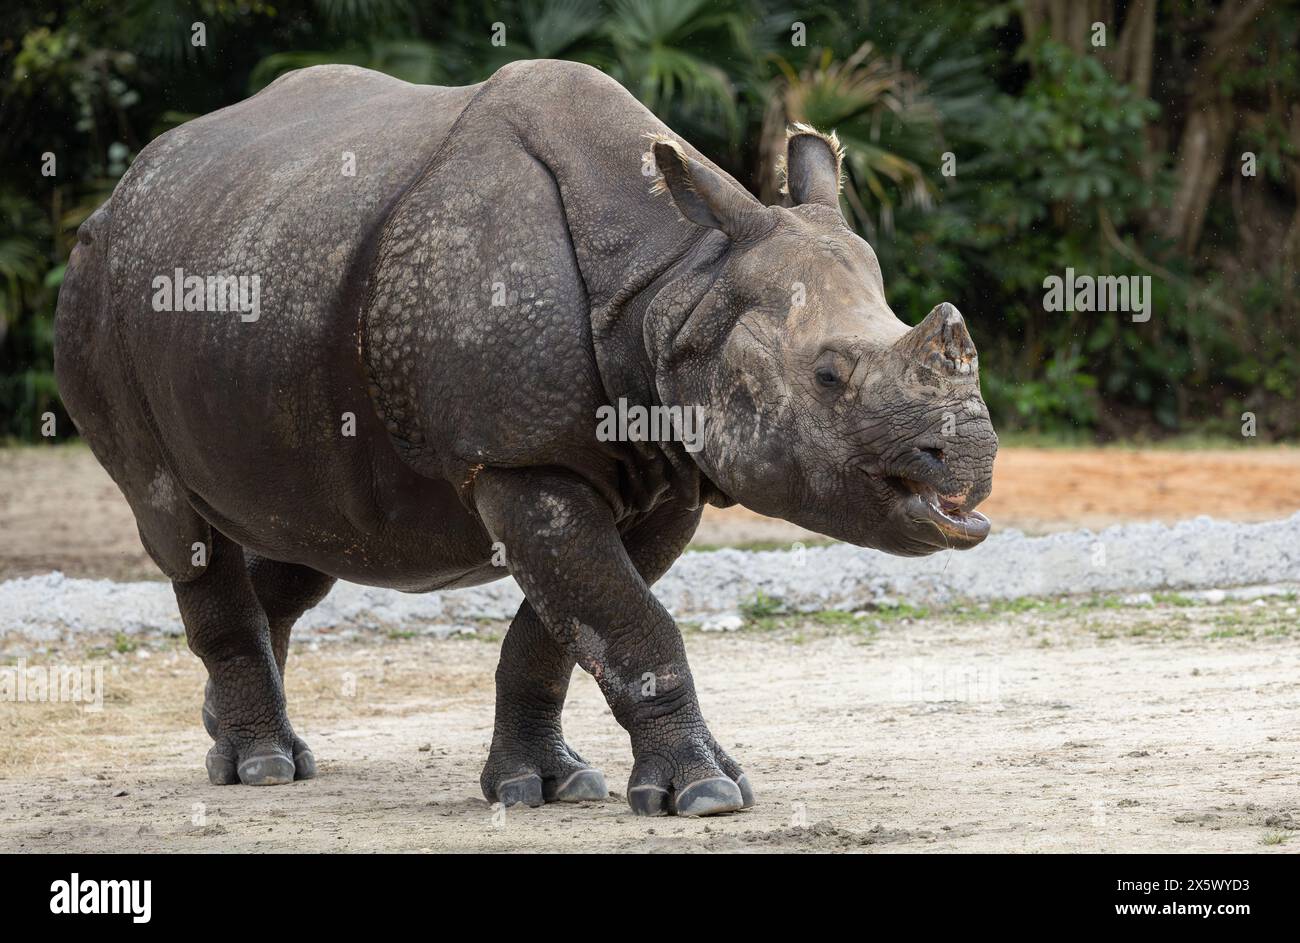 Greater One-Horned or Indian Rhinoceros Stock Photo